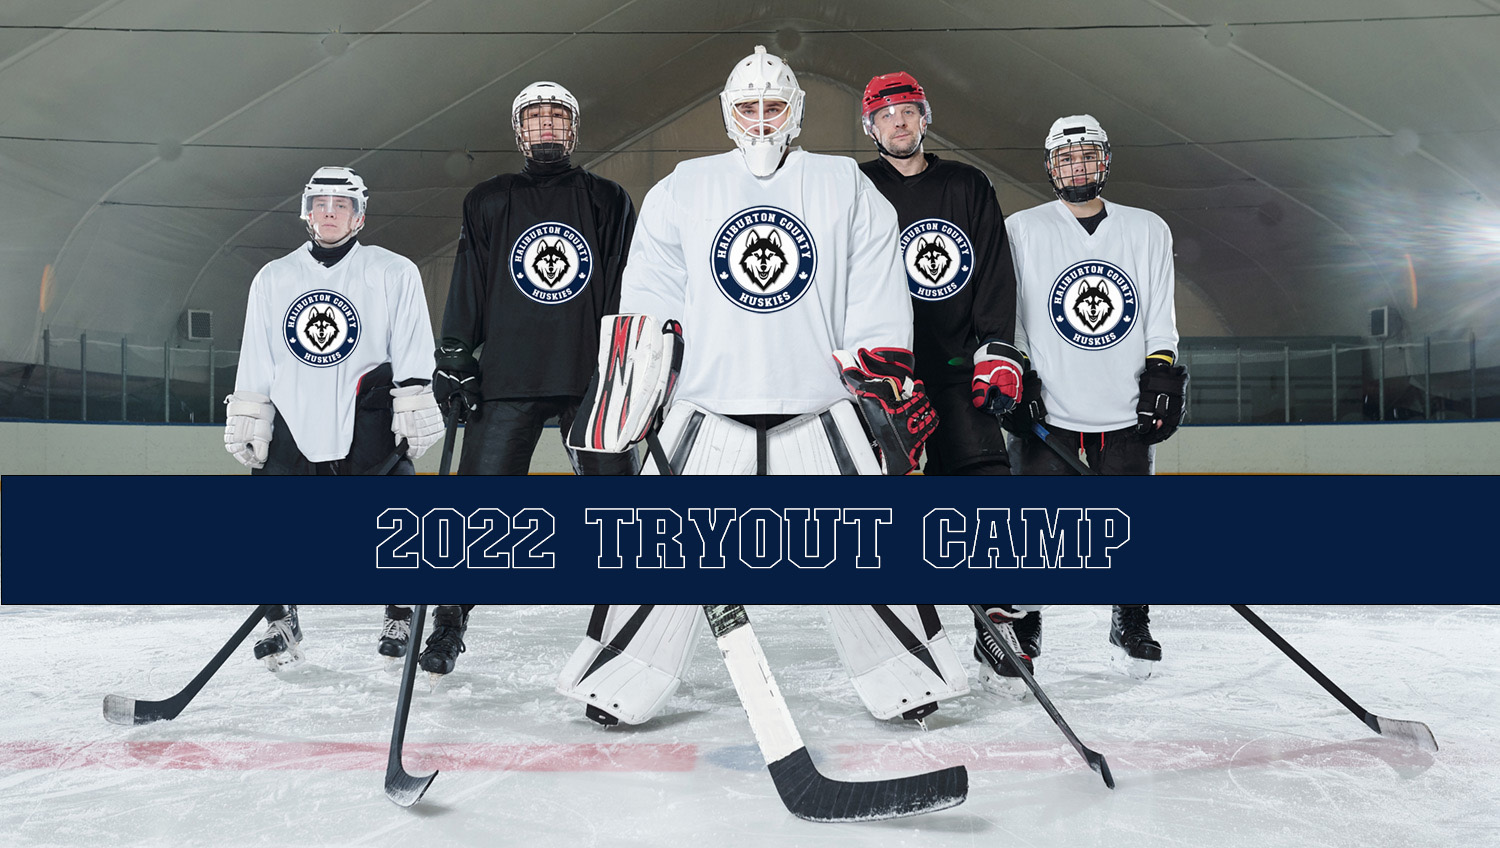 Huskies 2022 Tryout Camp